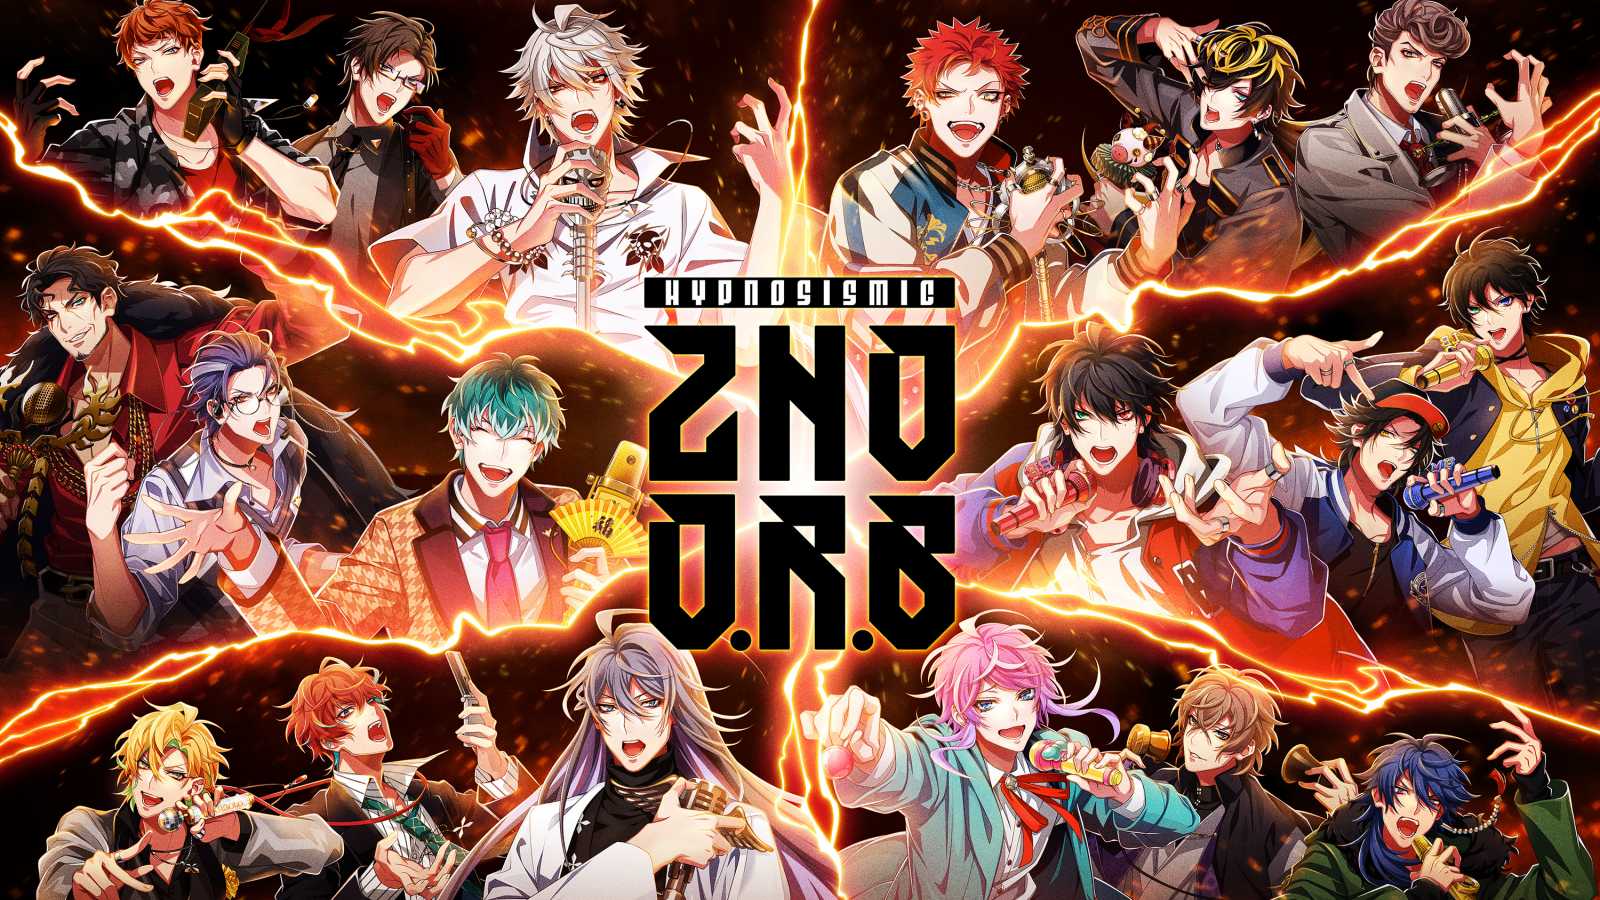 Hypnosis Mic Announces Three Releases for "2nd Division Rap Battle" © EVIL LINE RECORDS. All rights reserved.